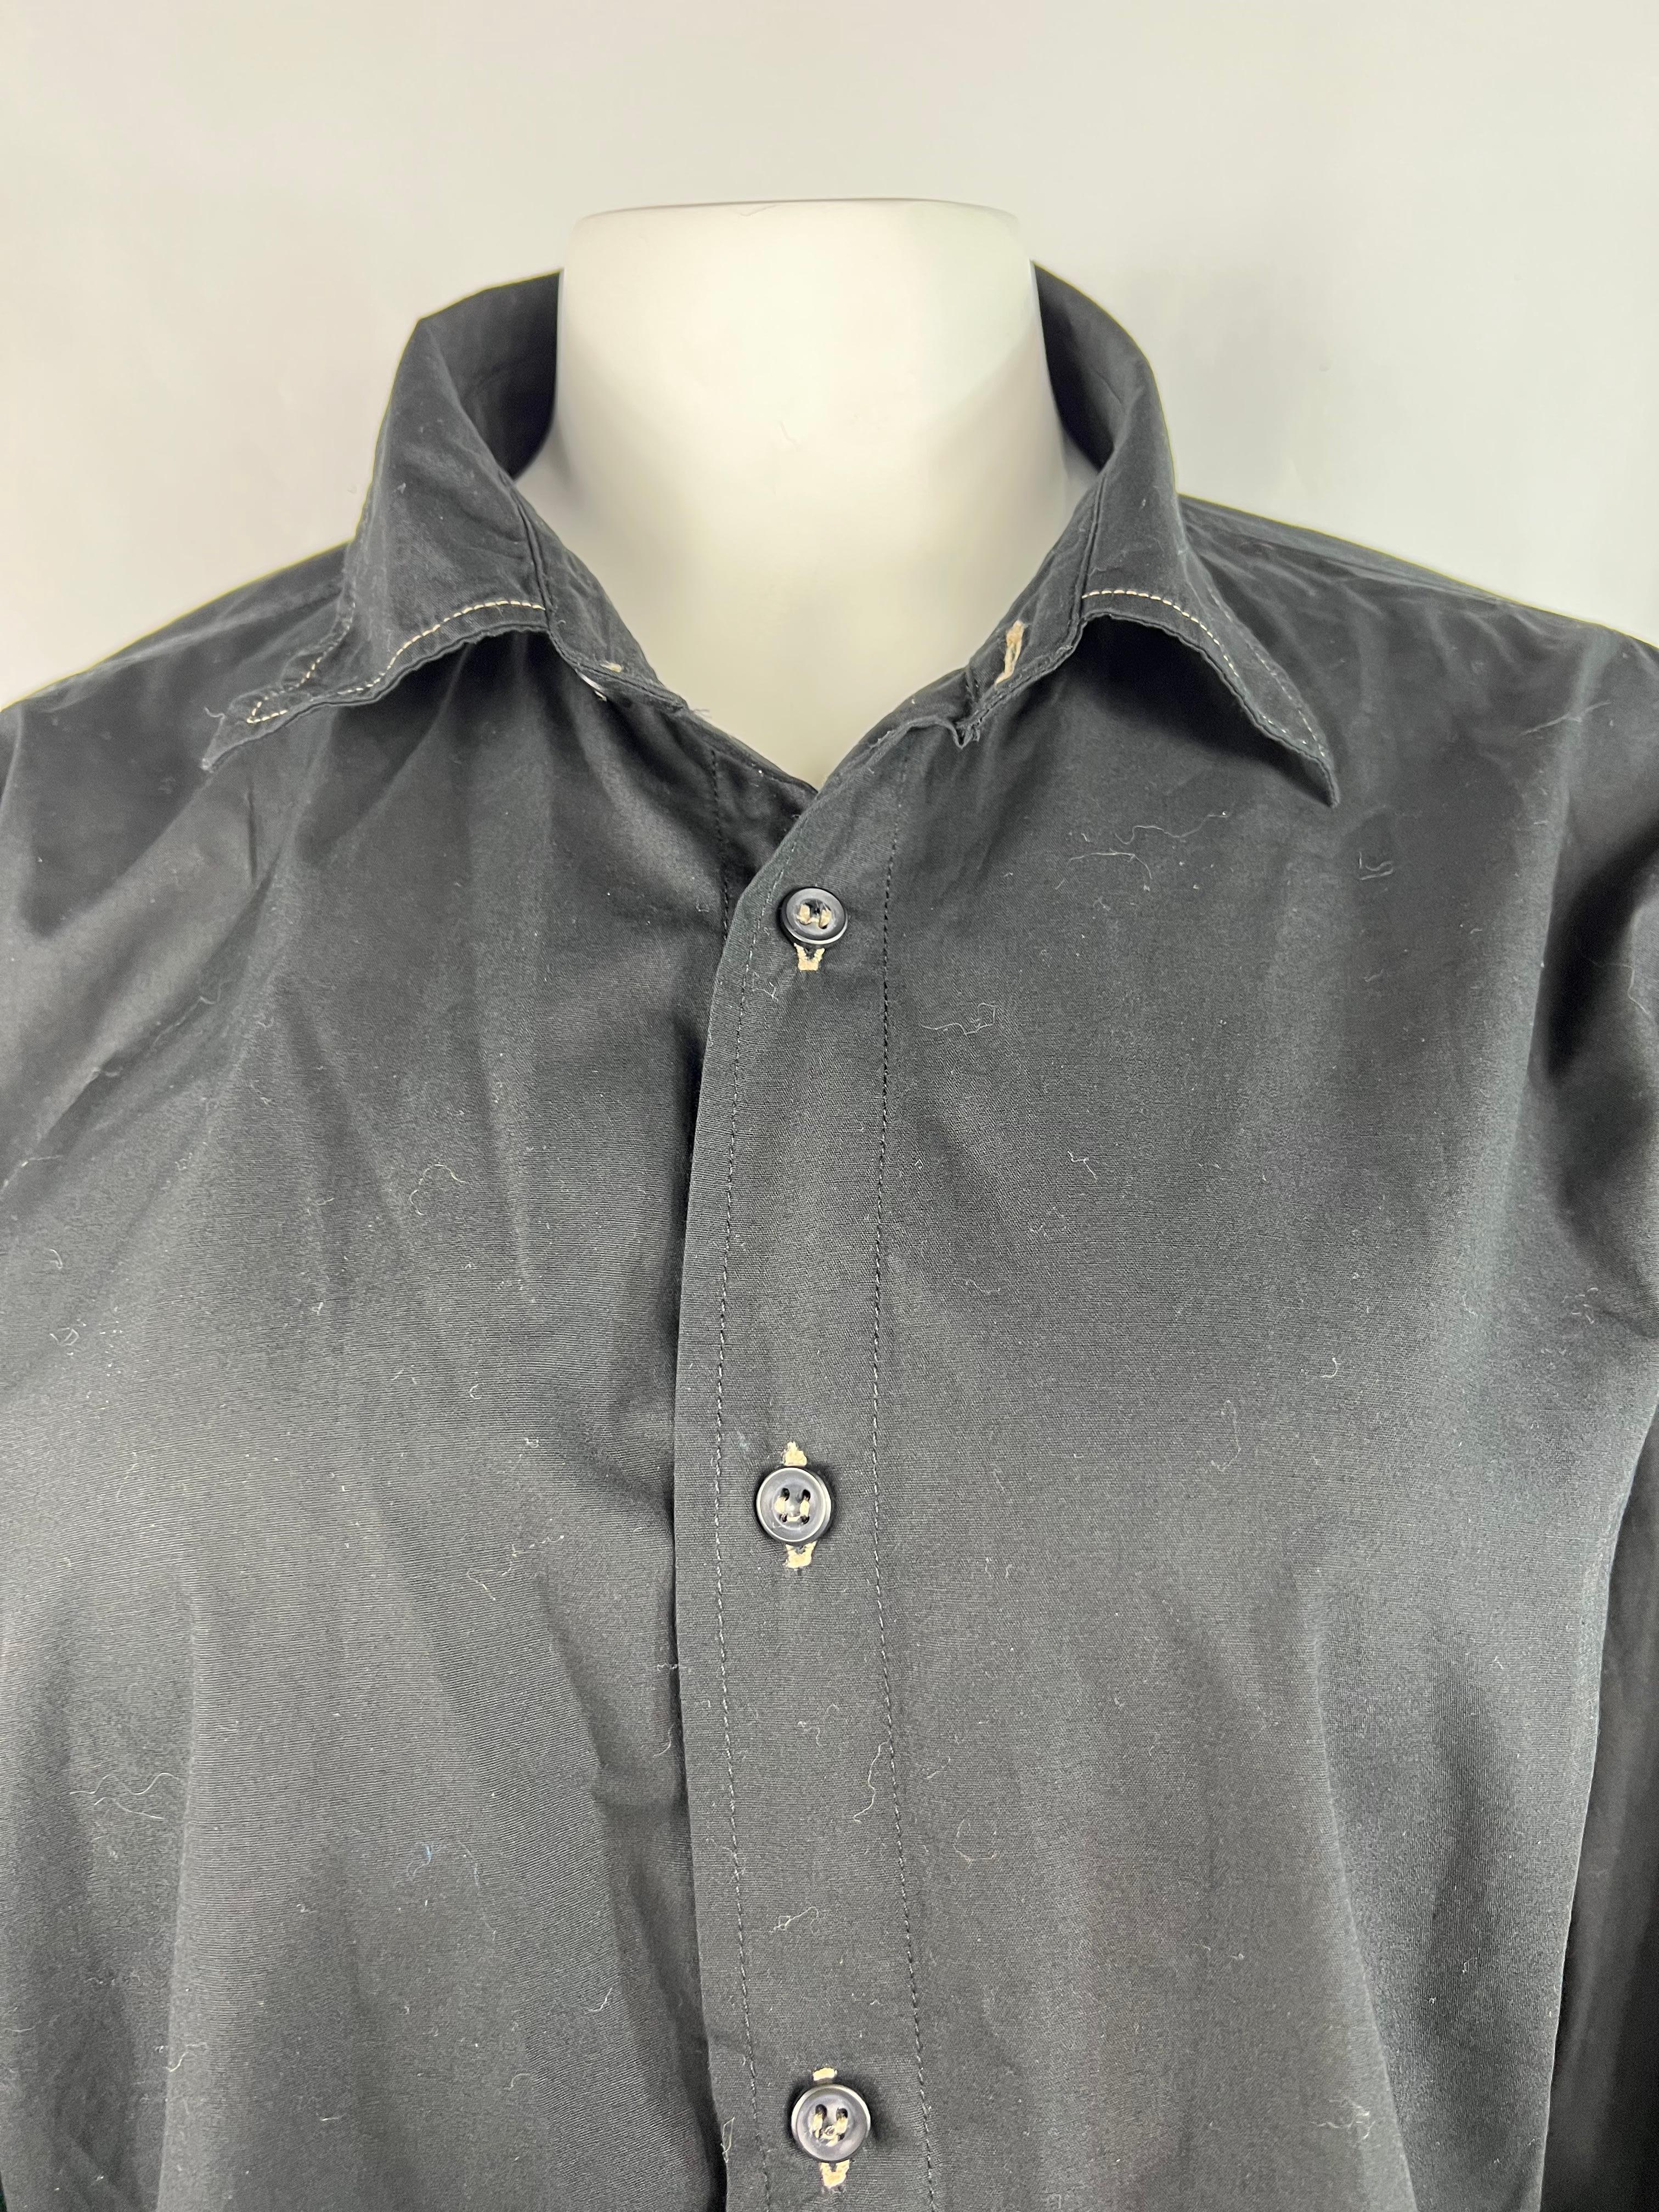 Product details:

The shirt features collar, front button down closure. Made in Italy.